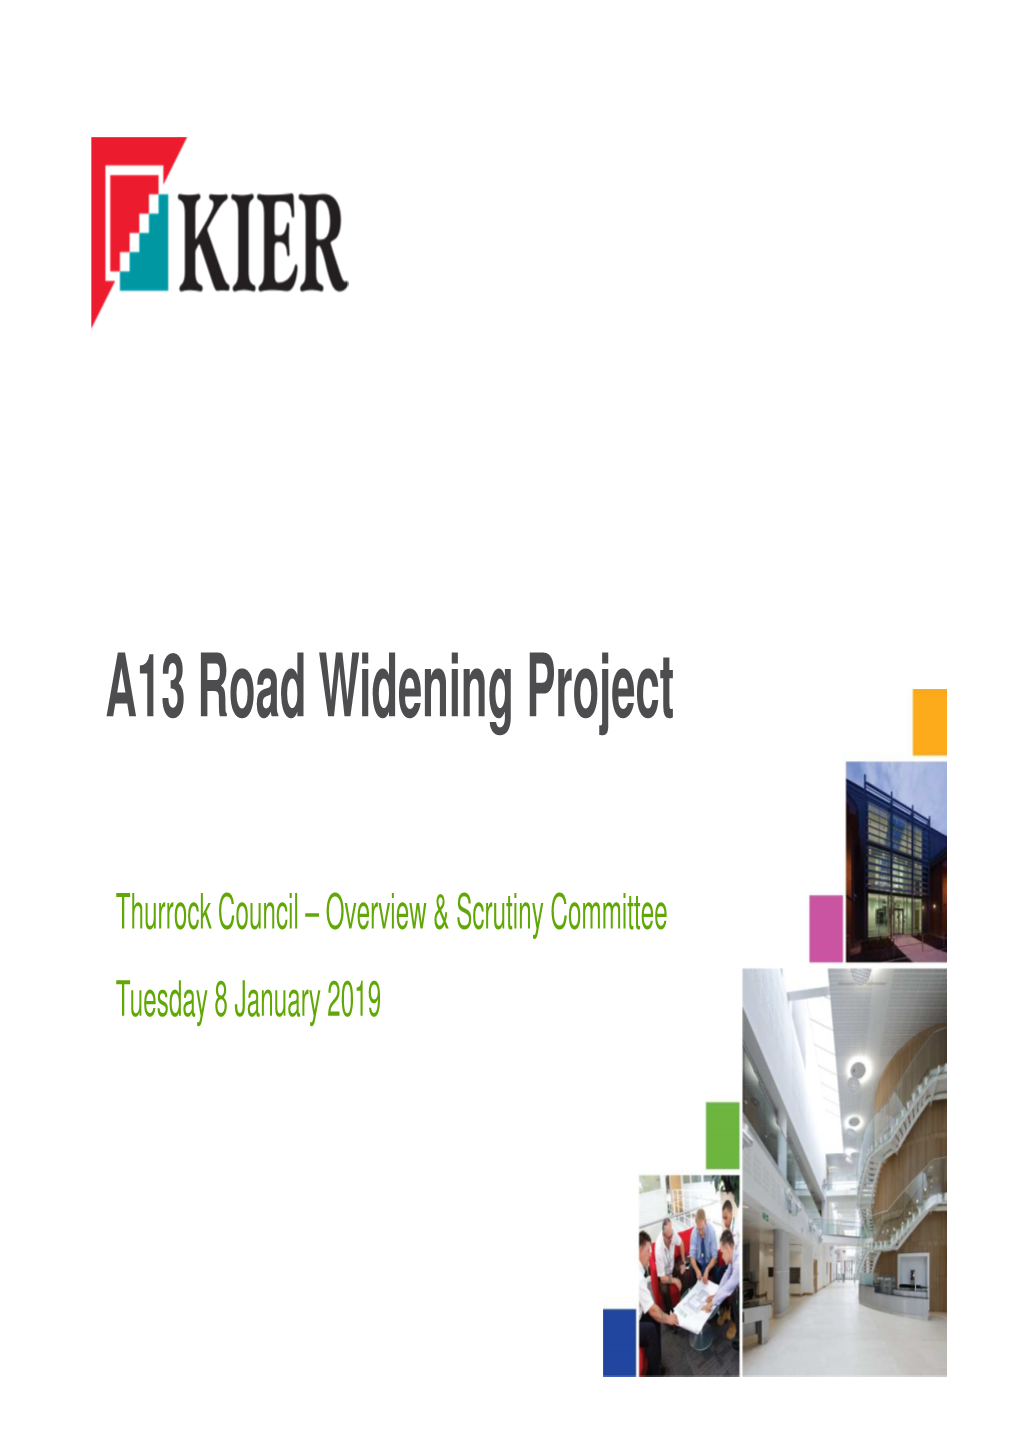 A13 Road Widening Project